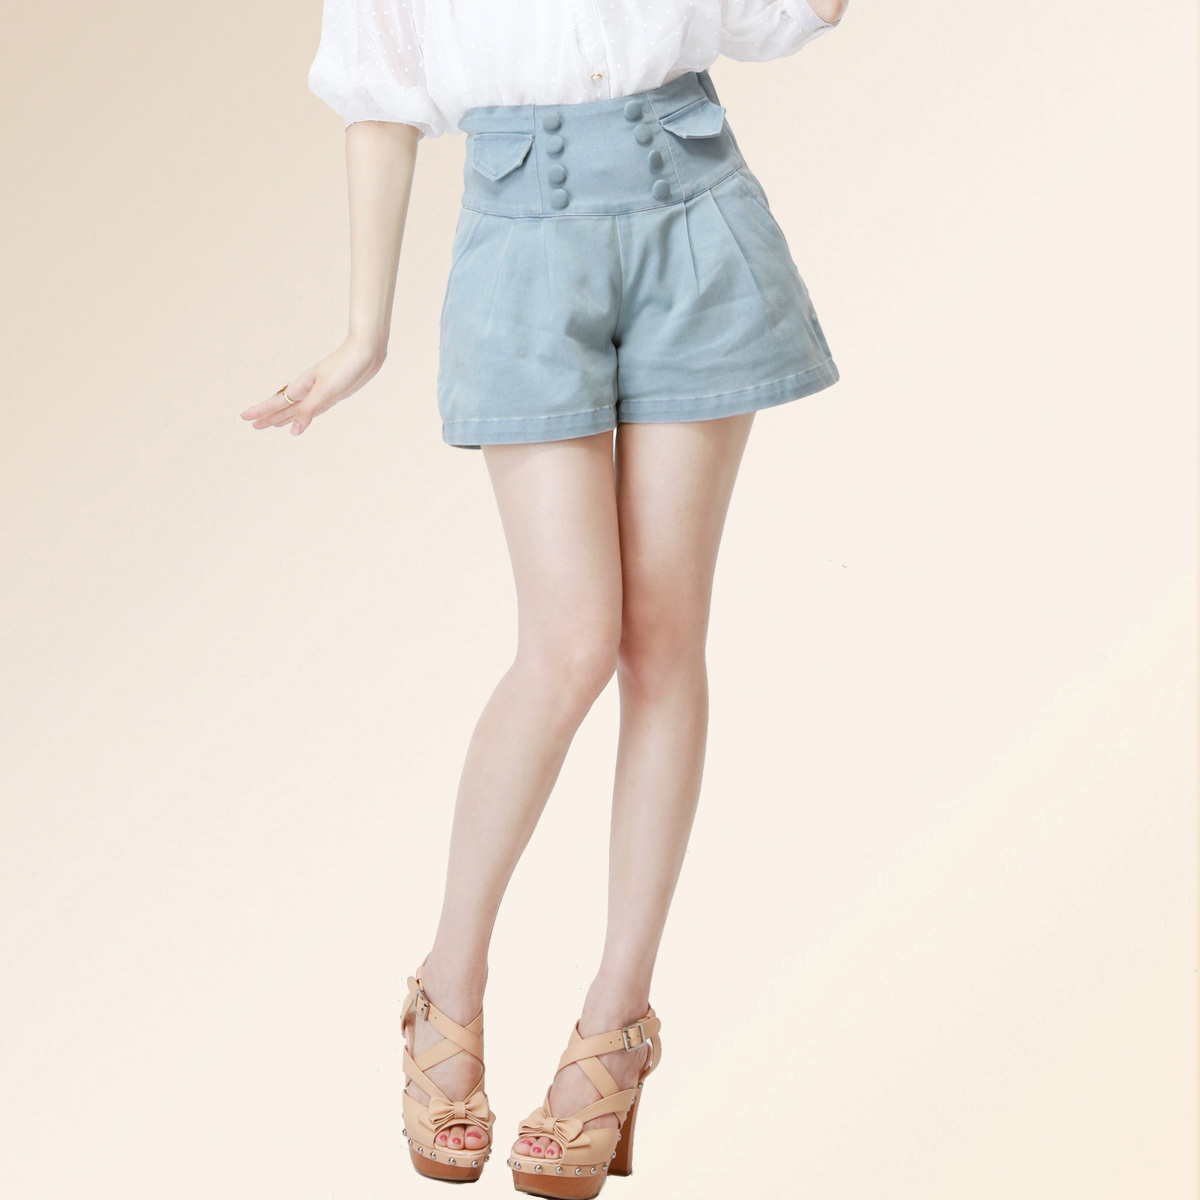 Shorts 2012 spring and summer women's denim slim double breasted high waist shorts